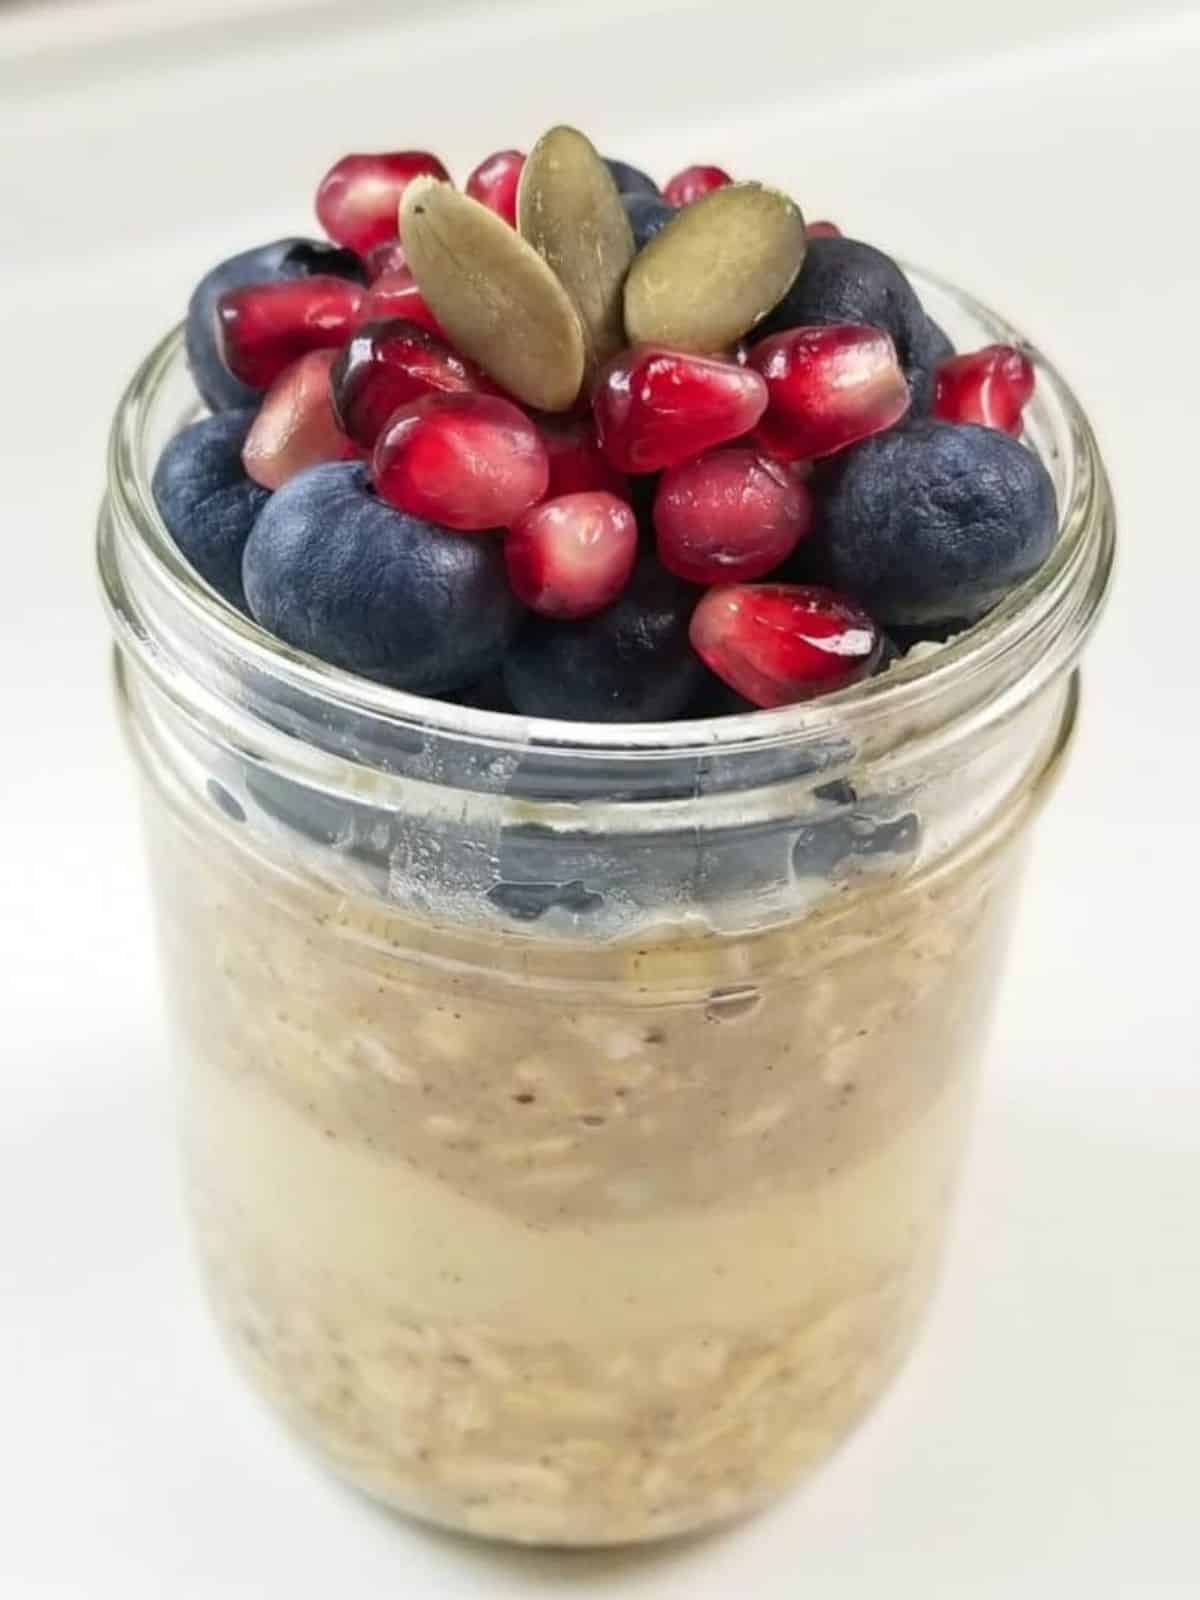 delicious jar of overnight oats featuring a mix of rolled oats, creamy filling, fruits, and nuts.